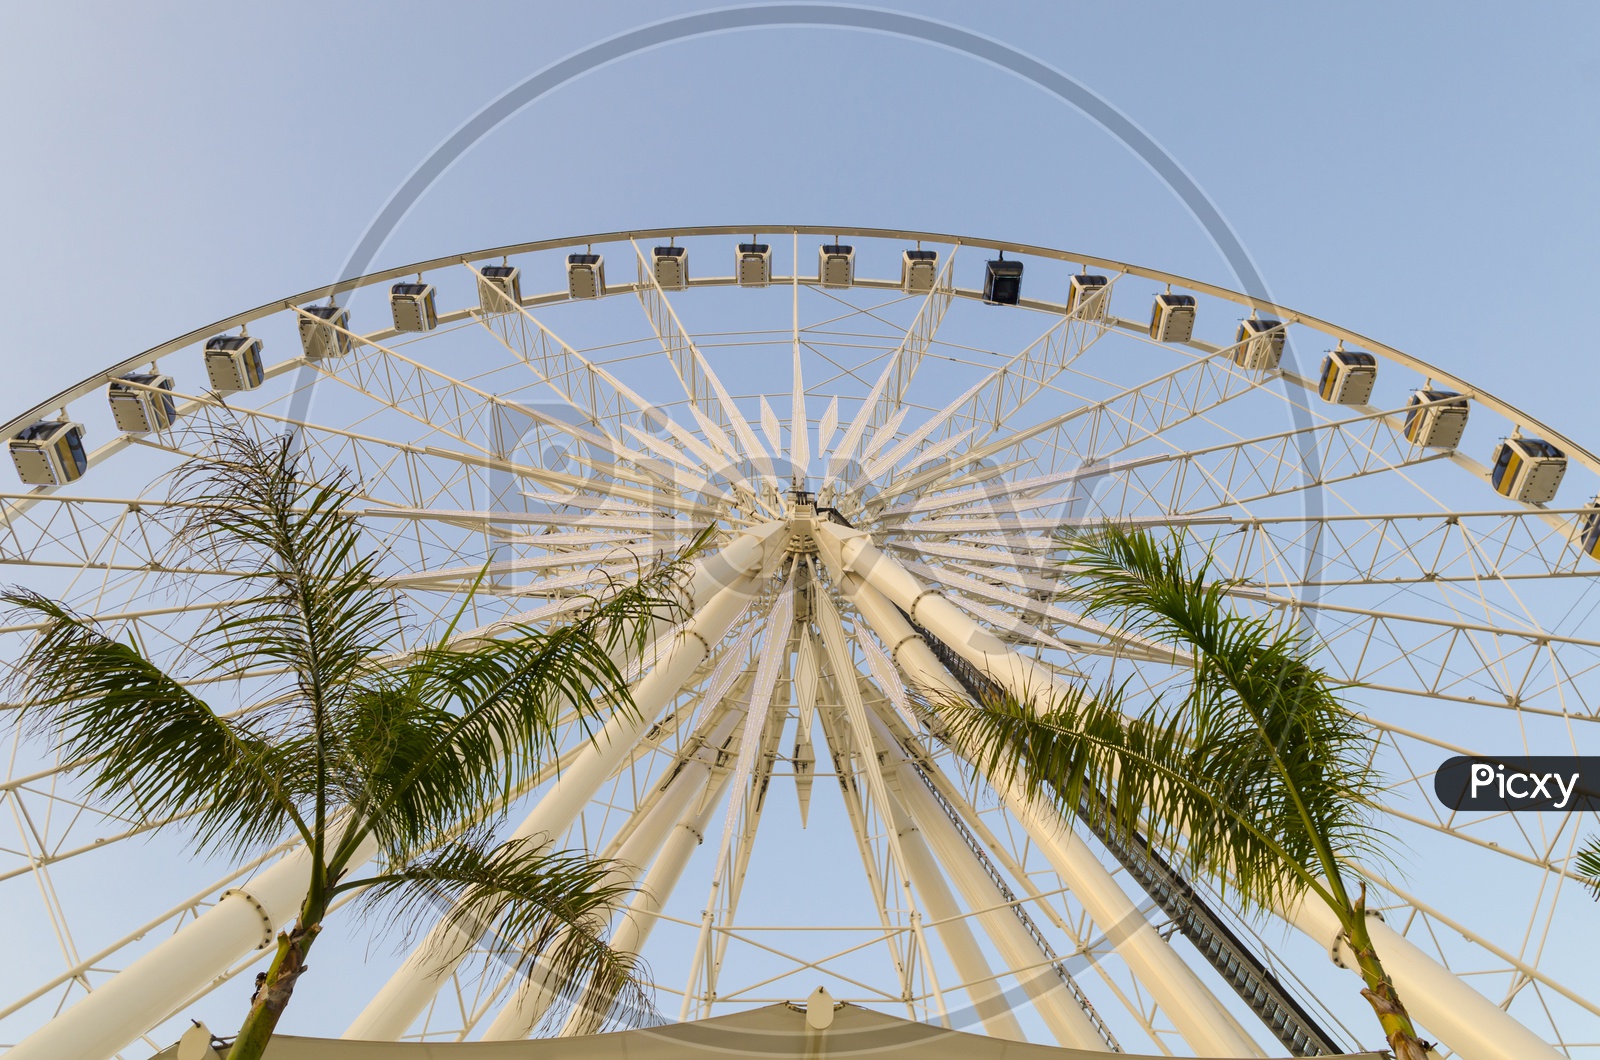 A Large Ferris wheel in the blue sky of Thailand